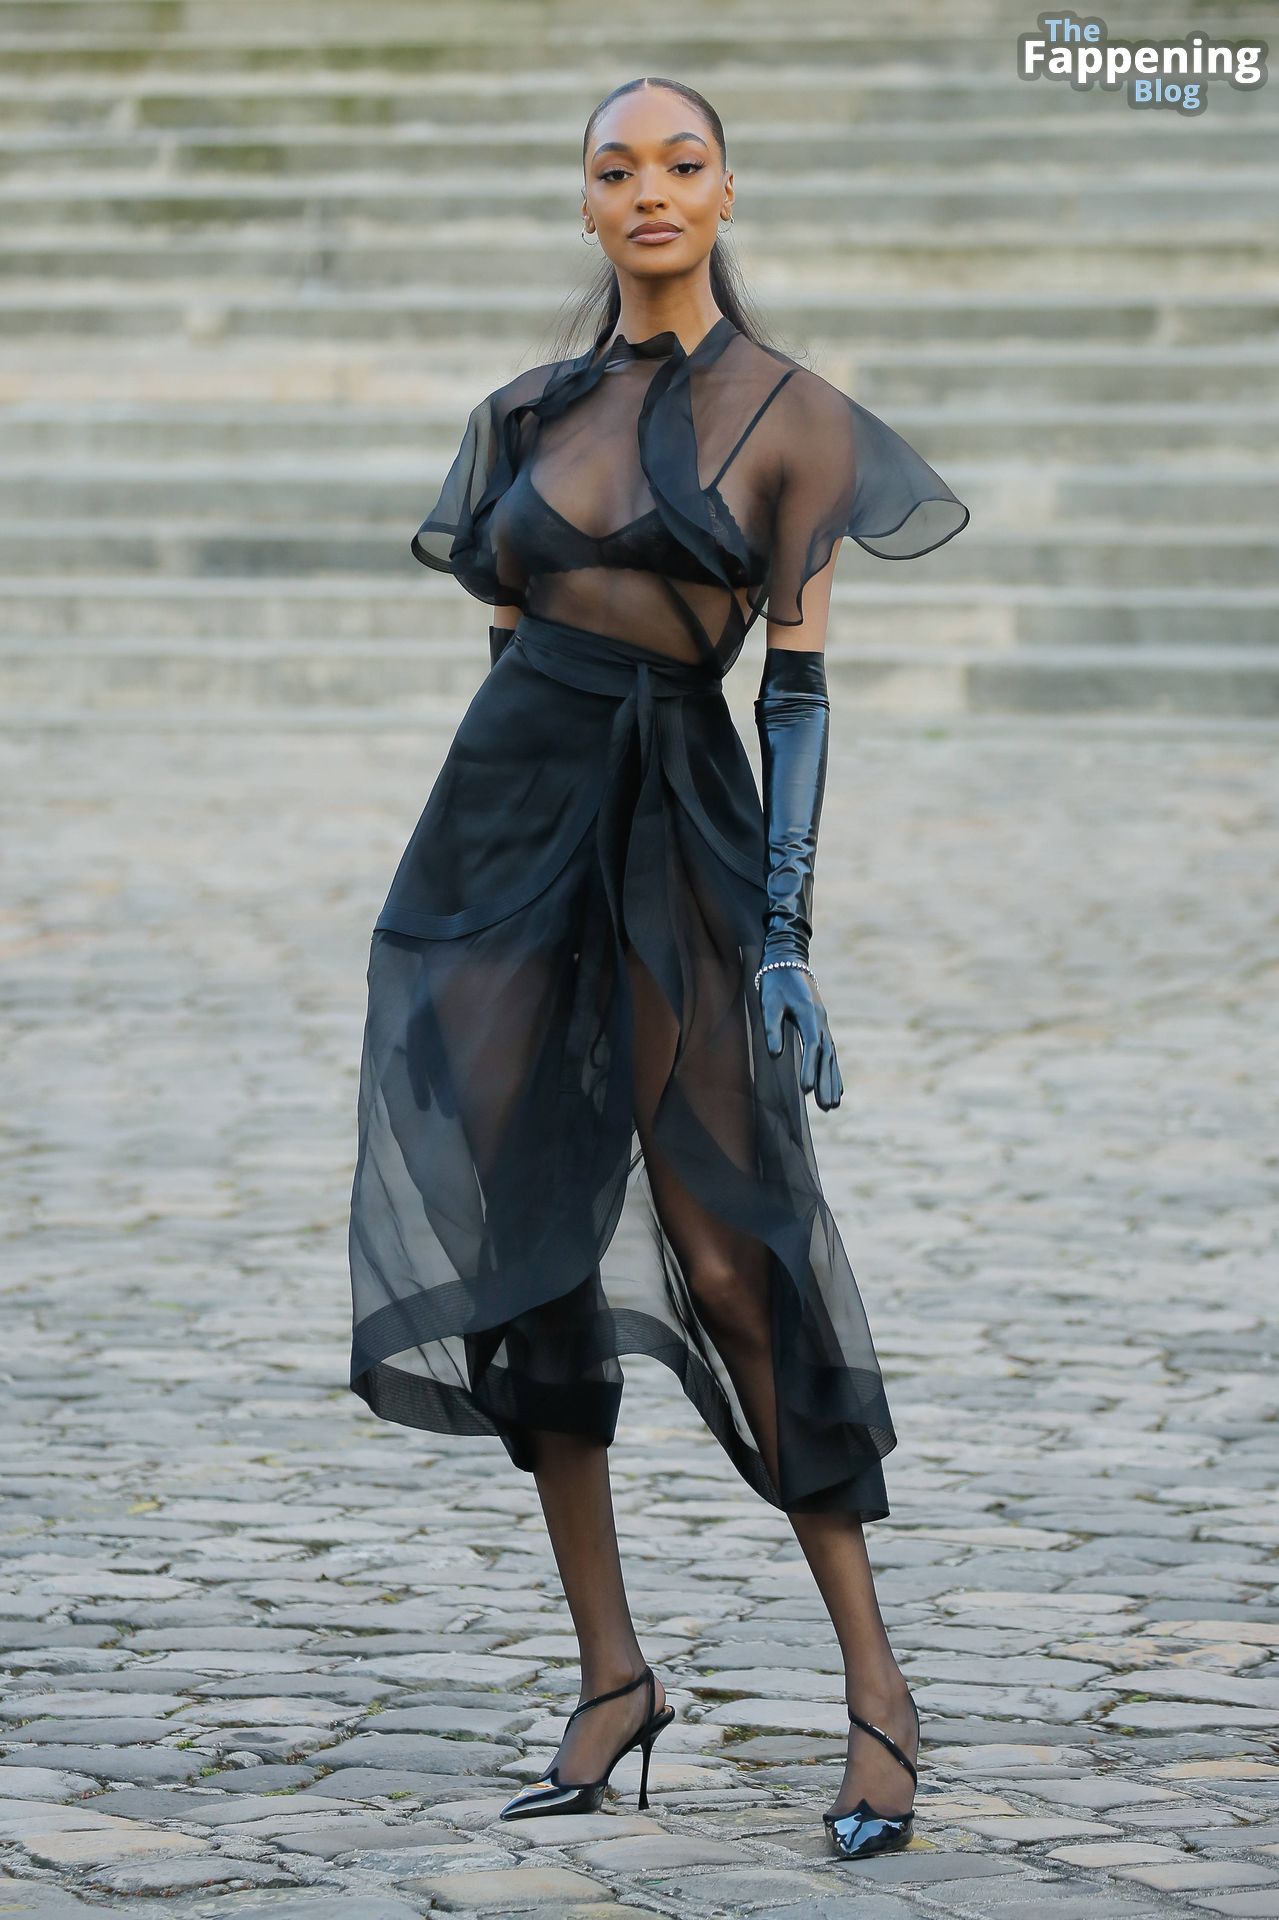 Jourdan Dunn Displays Her Nude Tits at the Victoria Beckham Fashion Show in Paris (45 Photos)